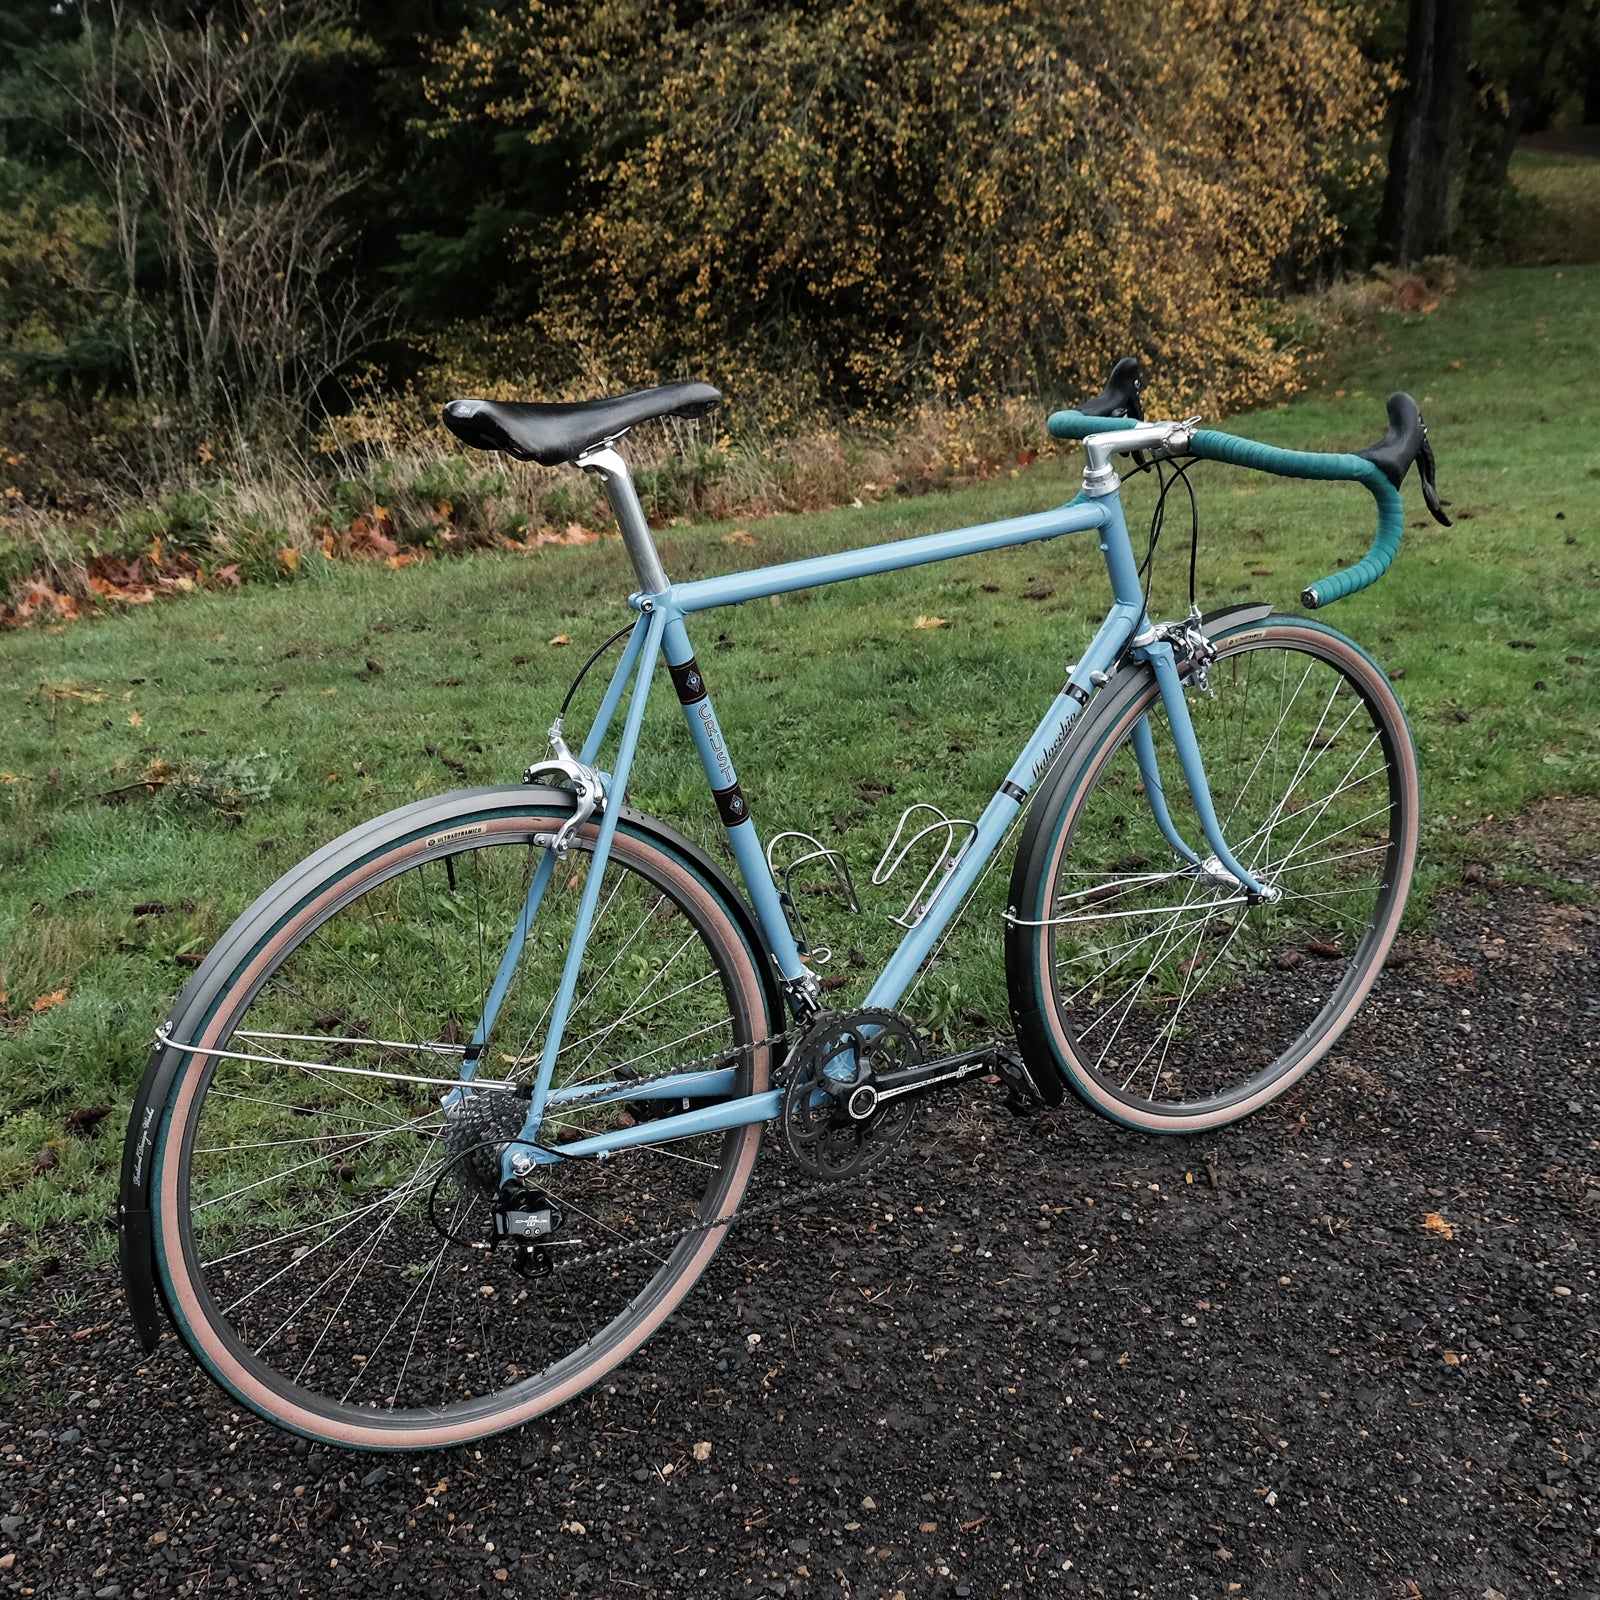 Portland designed fenders on a bike set up for Portland winter riding.  Works well, it turns out.